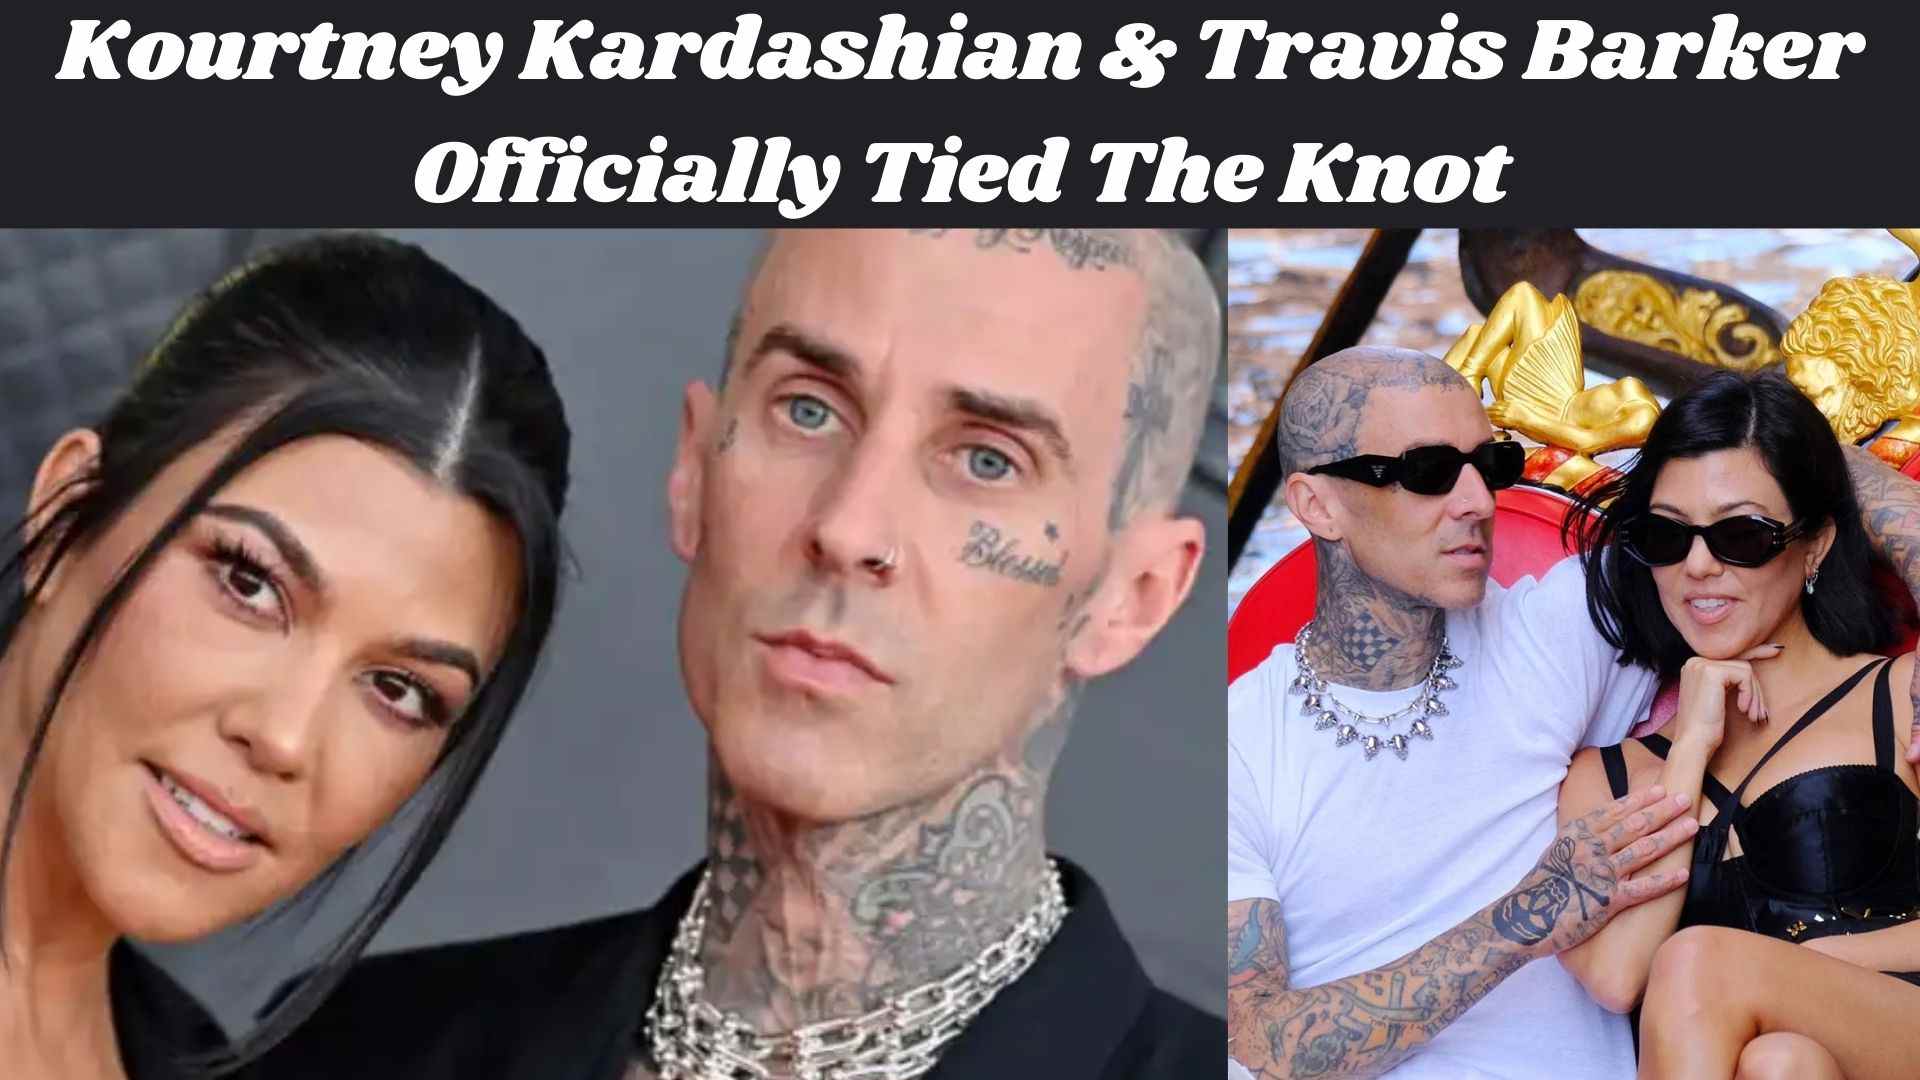 Kourtney Kardashian & Travis Barker Officially Tied The Knot Wallpaper and images